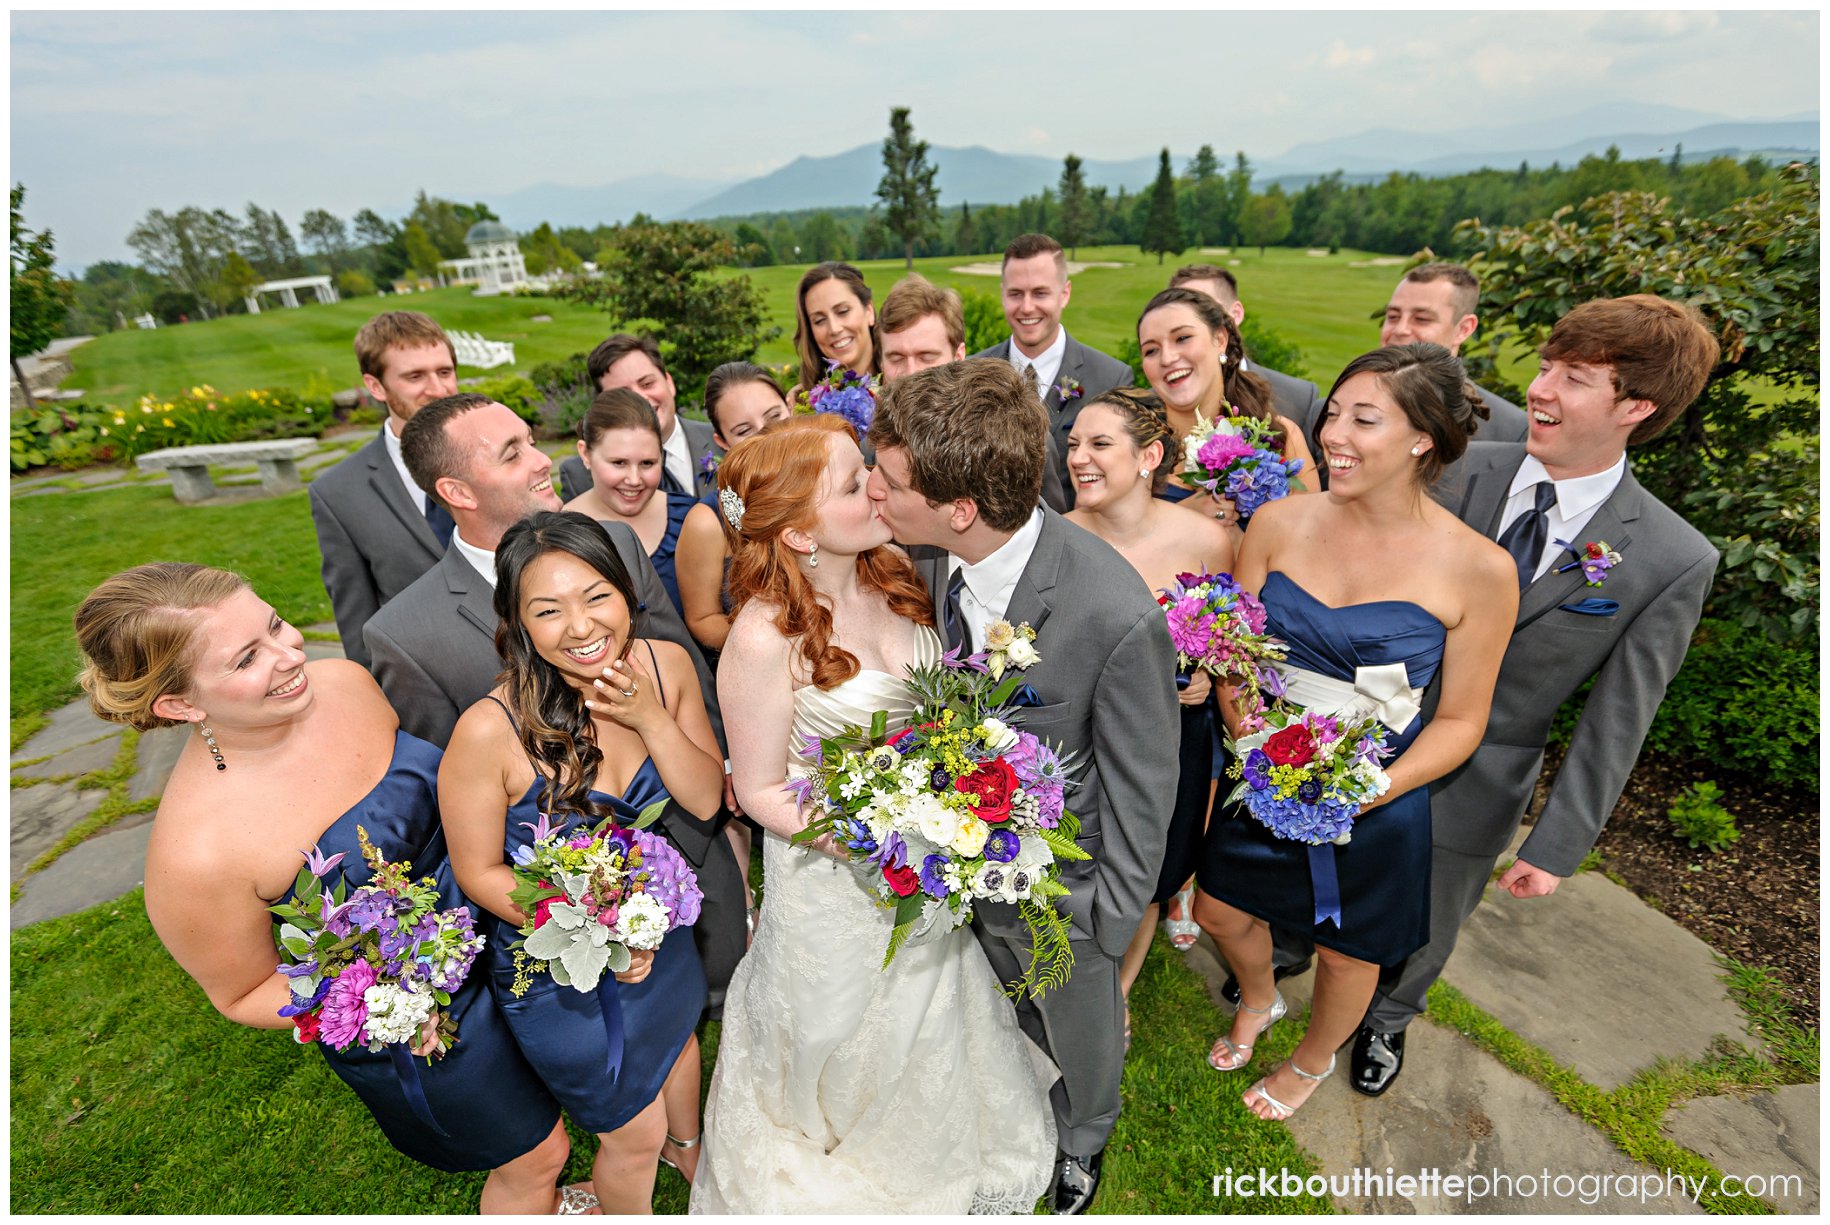 Bride and groom enjoy a kiss as the wedding party cheers them on